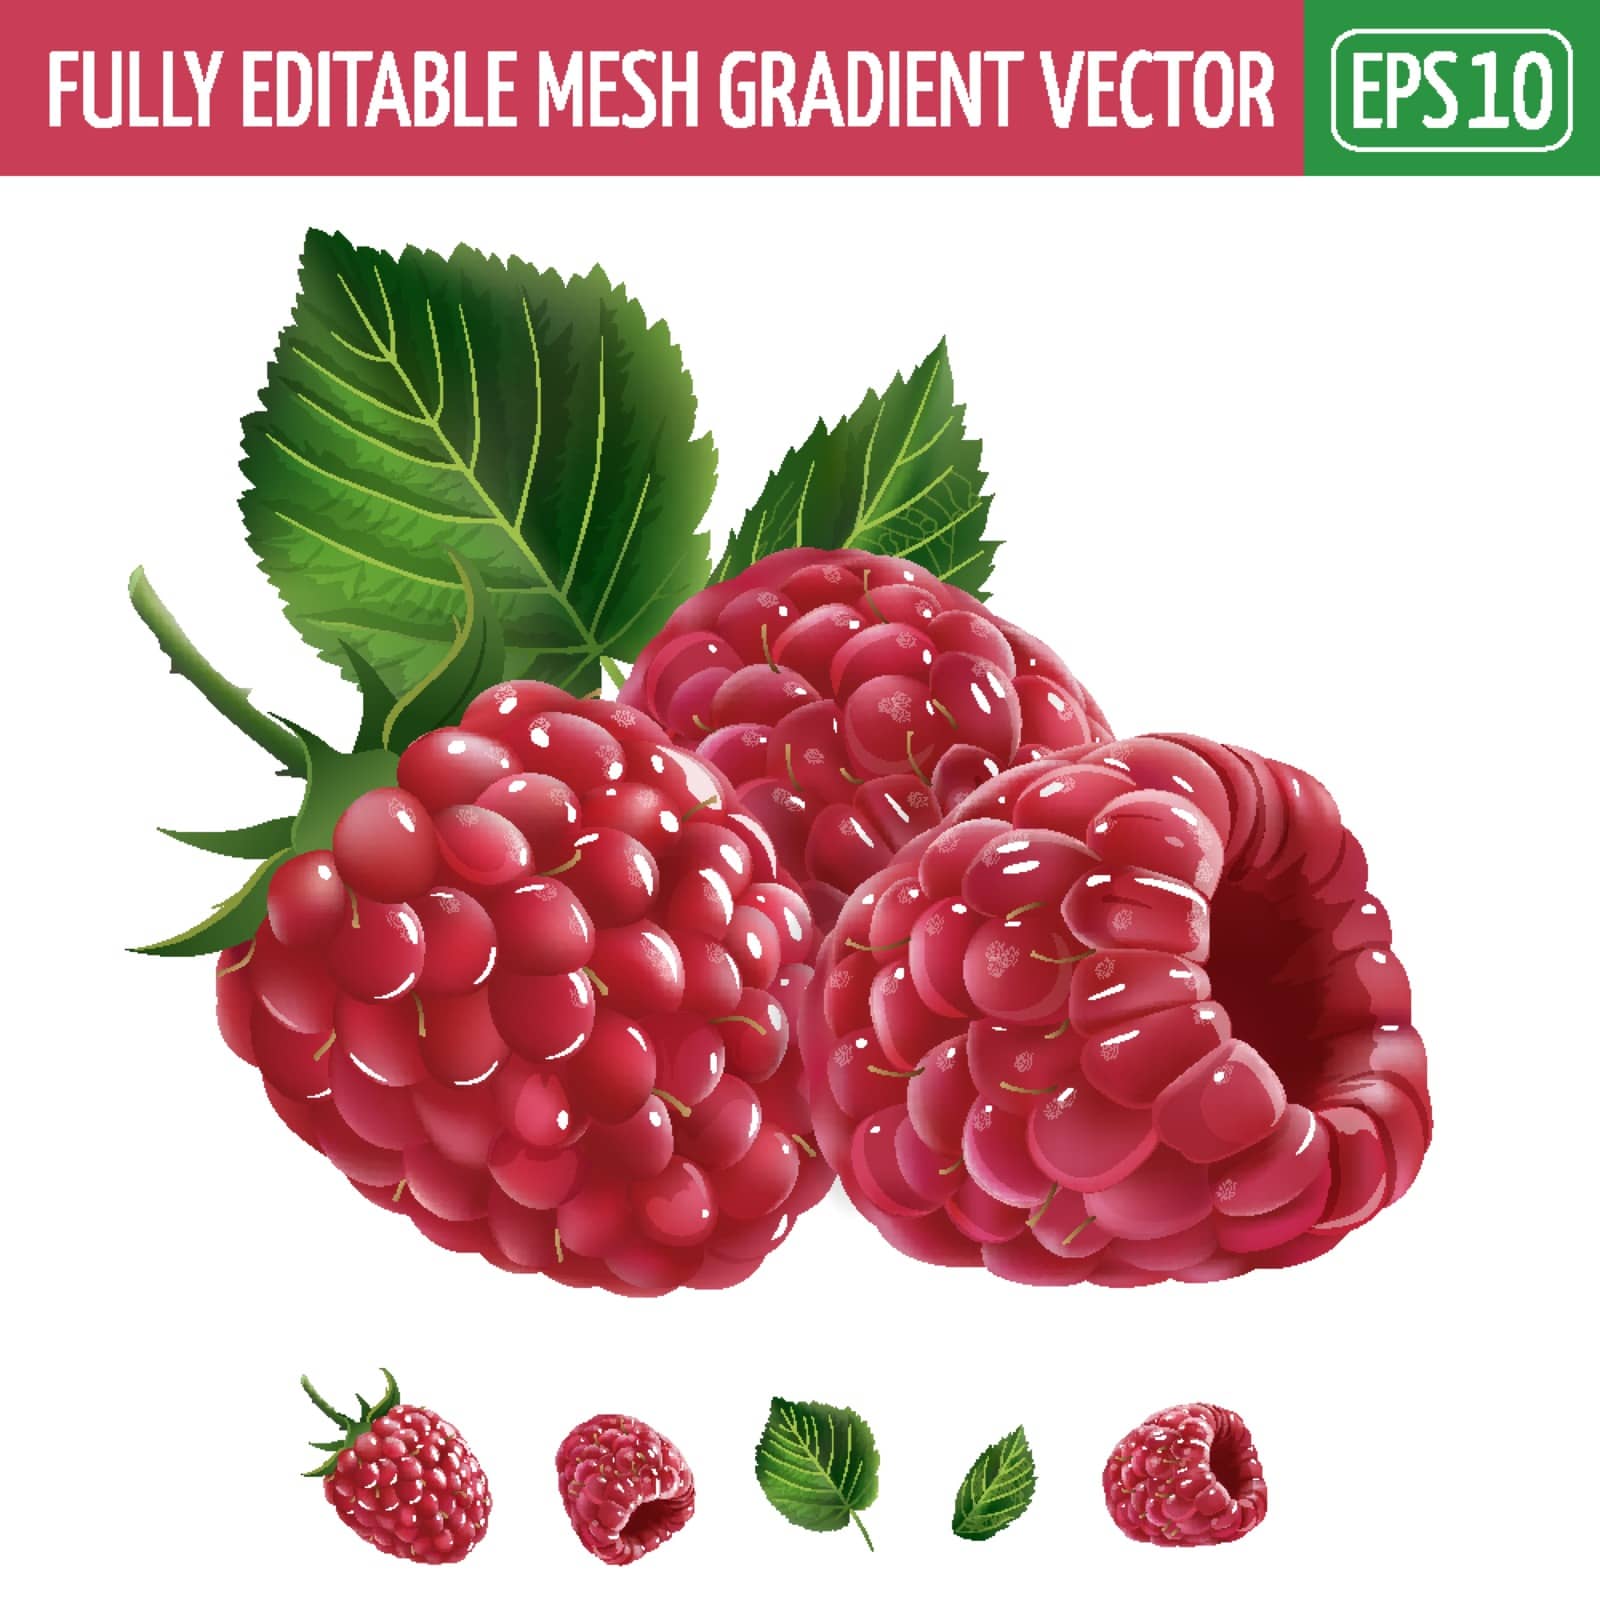 Raspberries on white background. Vector illustration by ConceptCafe